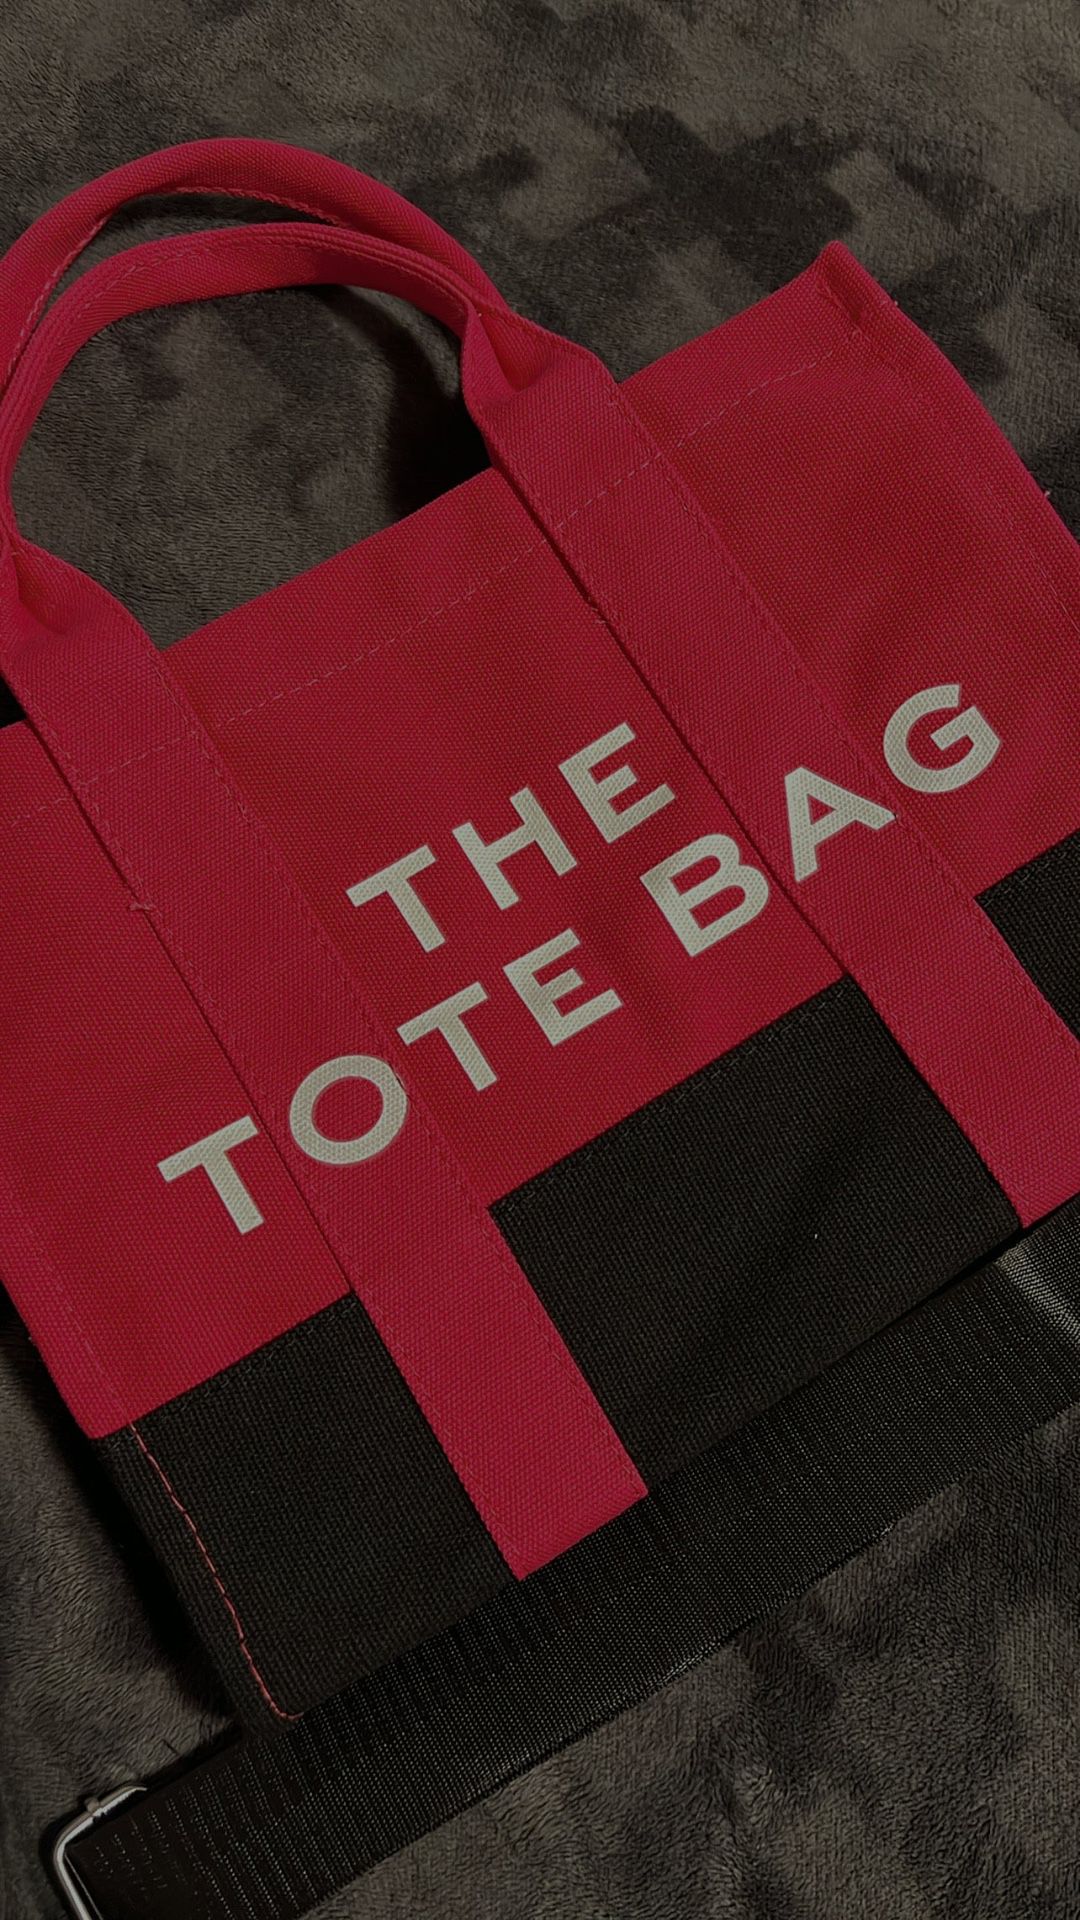 The Tote Bag Dupe